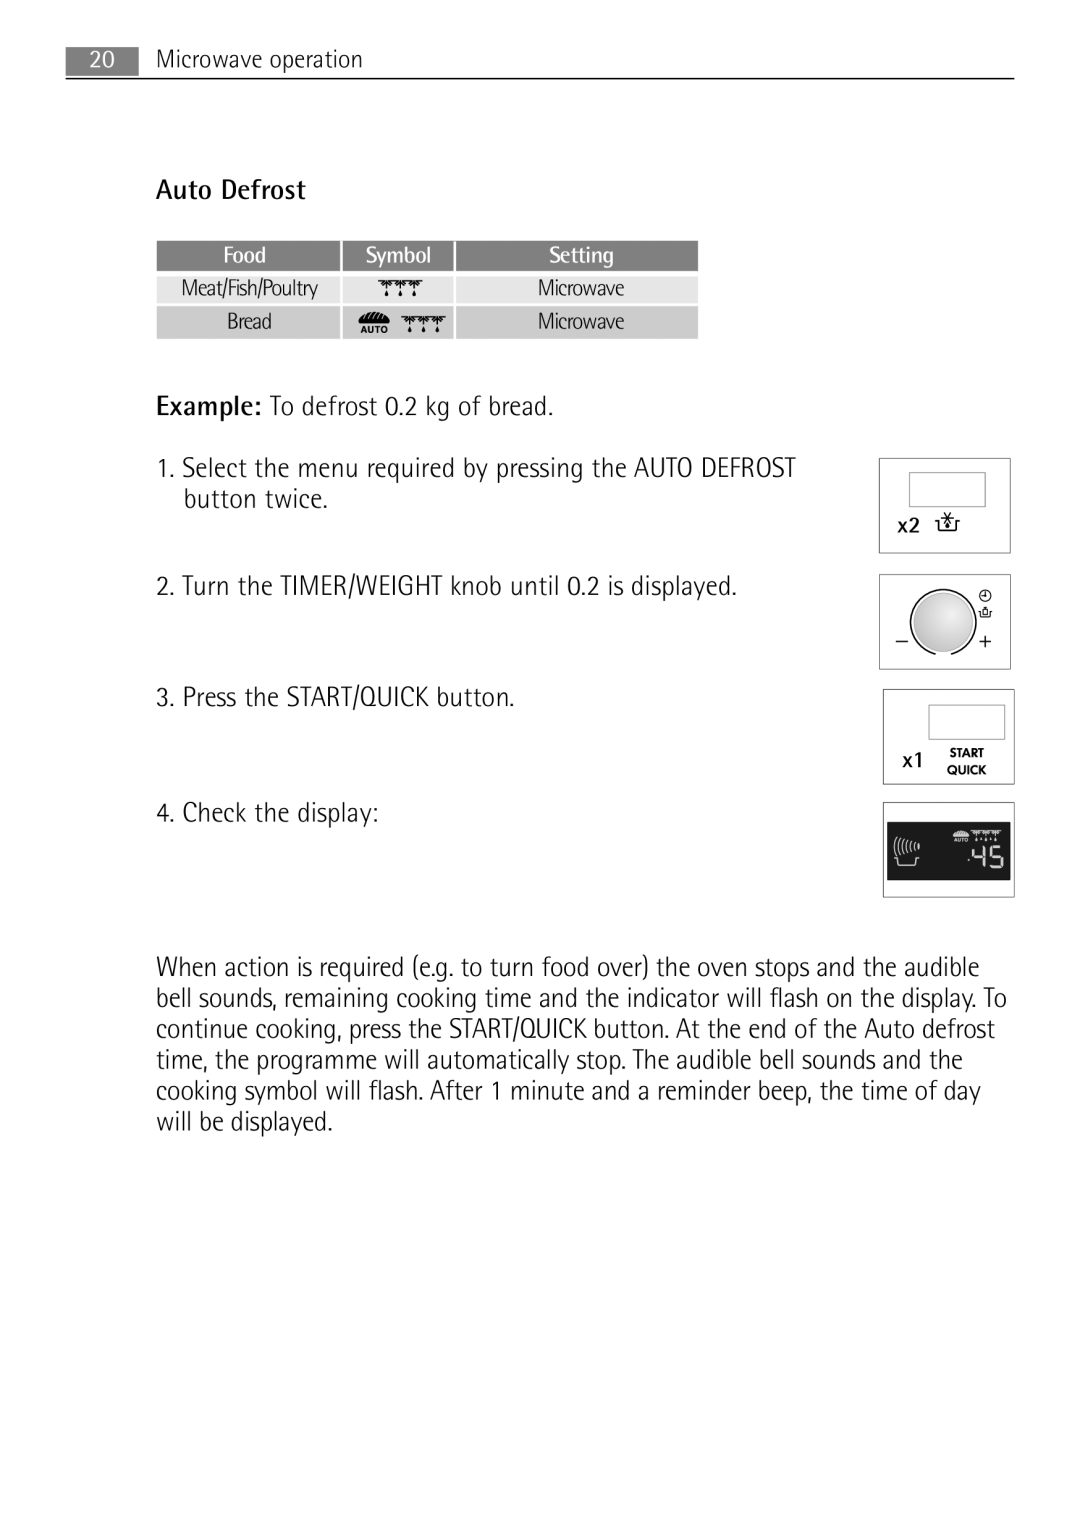 AEG MCD2662E user manual Auto Defrost, Example: To defrost 0.2 kg of bread, Press the START/QUICK button, Check the display 